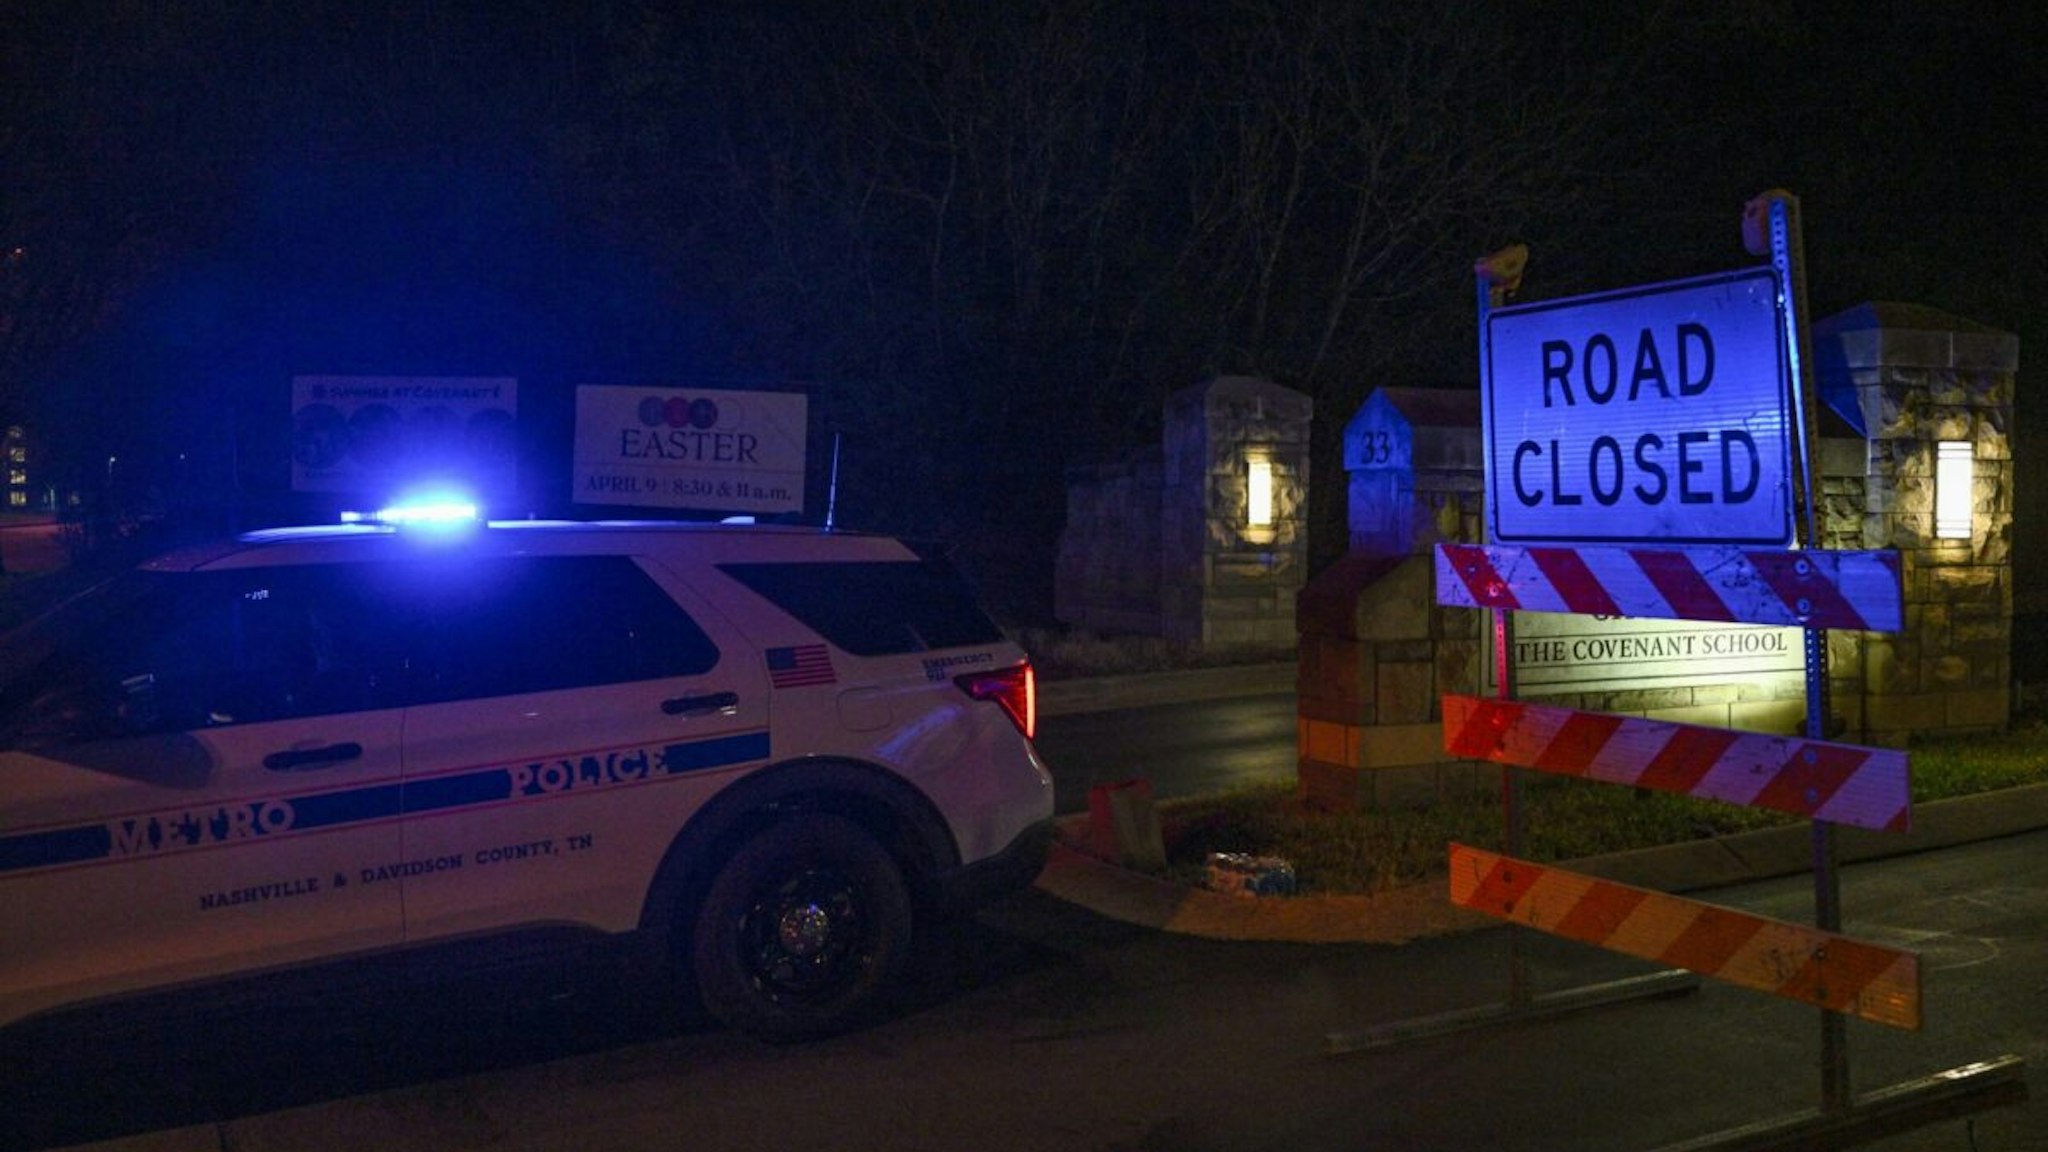 A police car blocks access to the Covenant School building at the Covenant Presbyterian Church, in Nashville, Tennessee, March 27, 2023. - A heavily armed former student killed three young children and three staff in what appeared to be a carefully planned attack at a private elementary school in Nashville on Monday, before being shot dead by police. Chief of Police John Drake named the suspect as Audrey Hale, 28, who the officer later said identified as transgender.